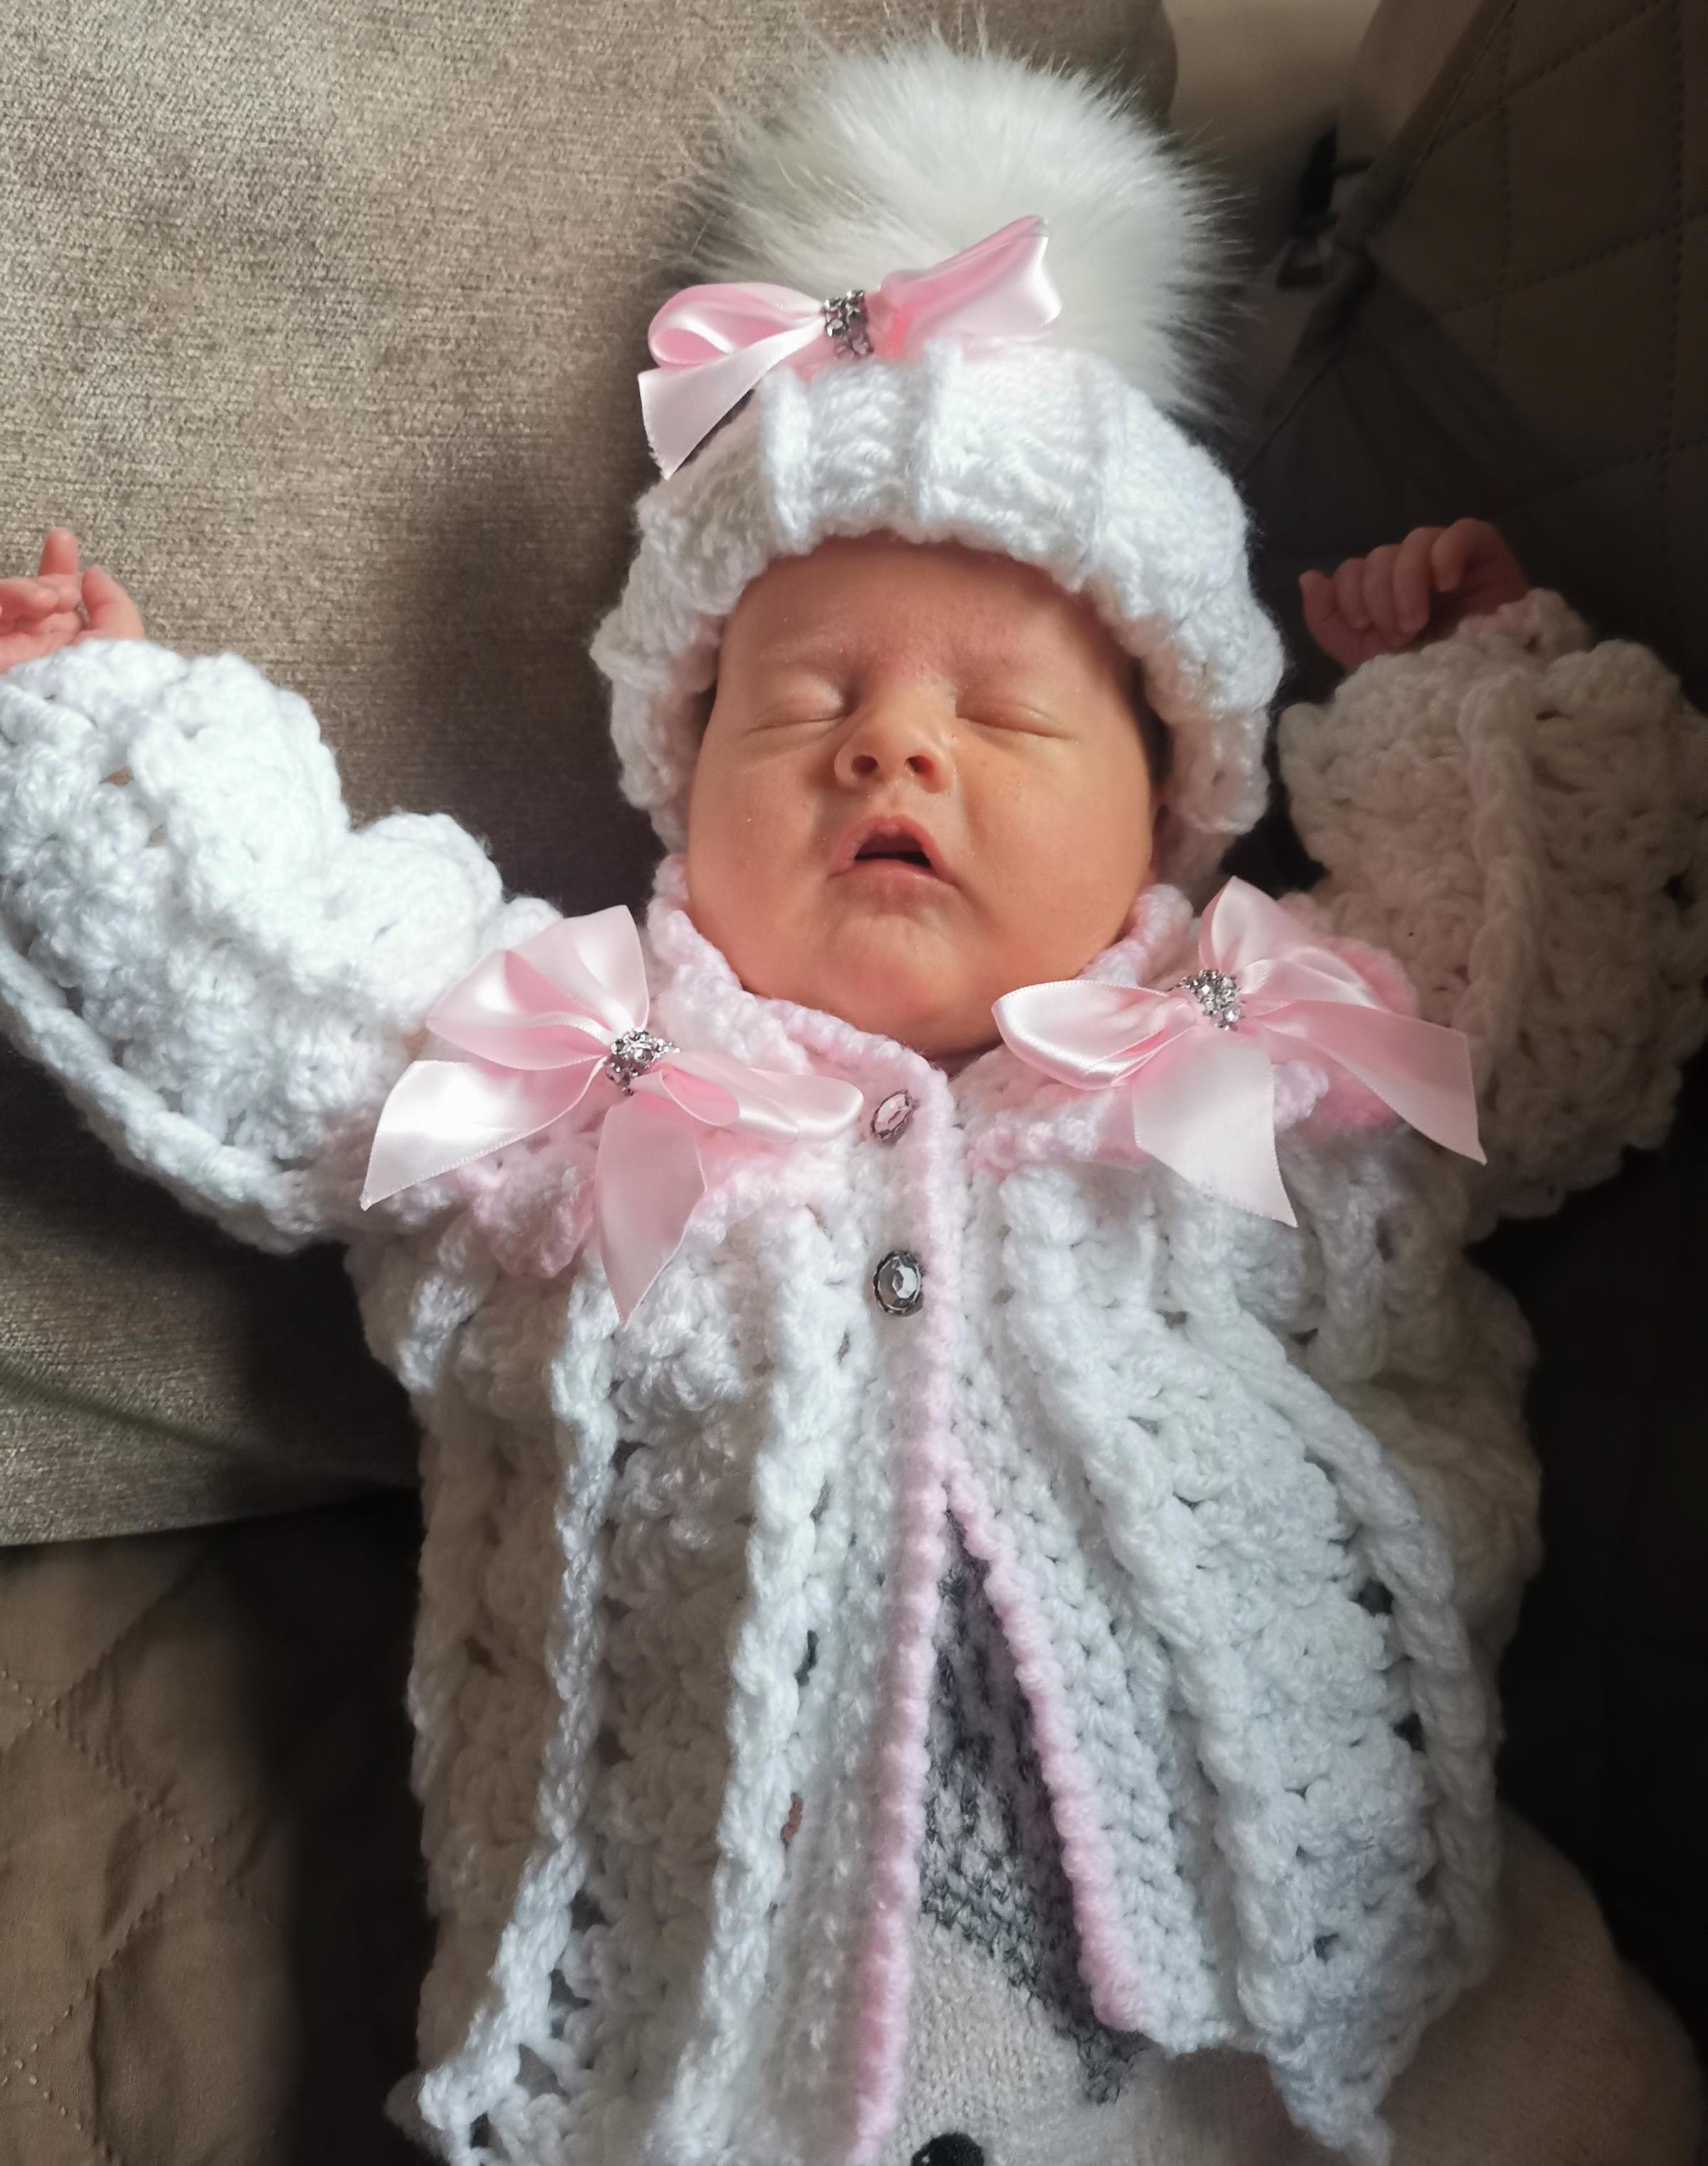 Ava-Lily Harding arrived six weeks early on January 8, 2021 at the Grange University Hospital, near Cwmbran, weighing 9lb 3oz. She had to spend two weeks on the special care baby unit before being allowed home. Mum and dad are Jackie and Martin Harding,